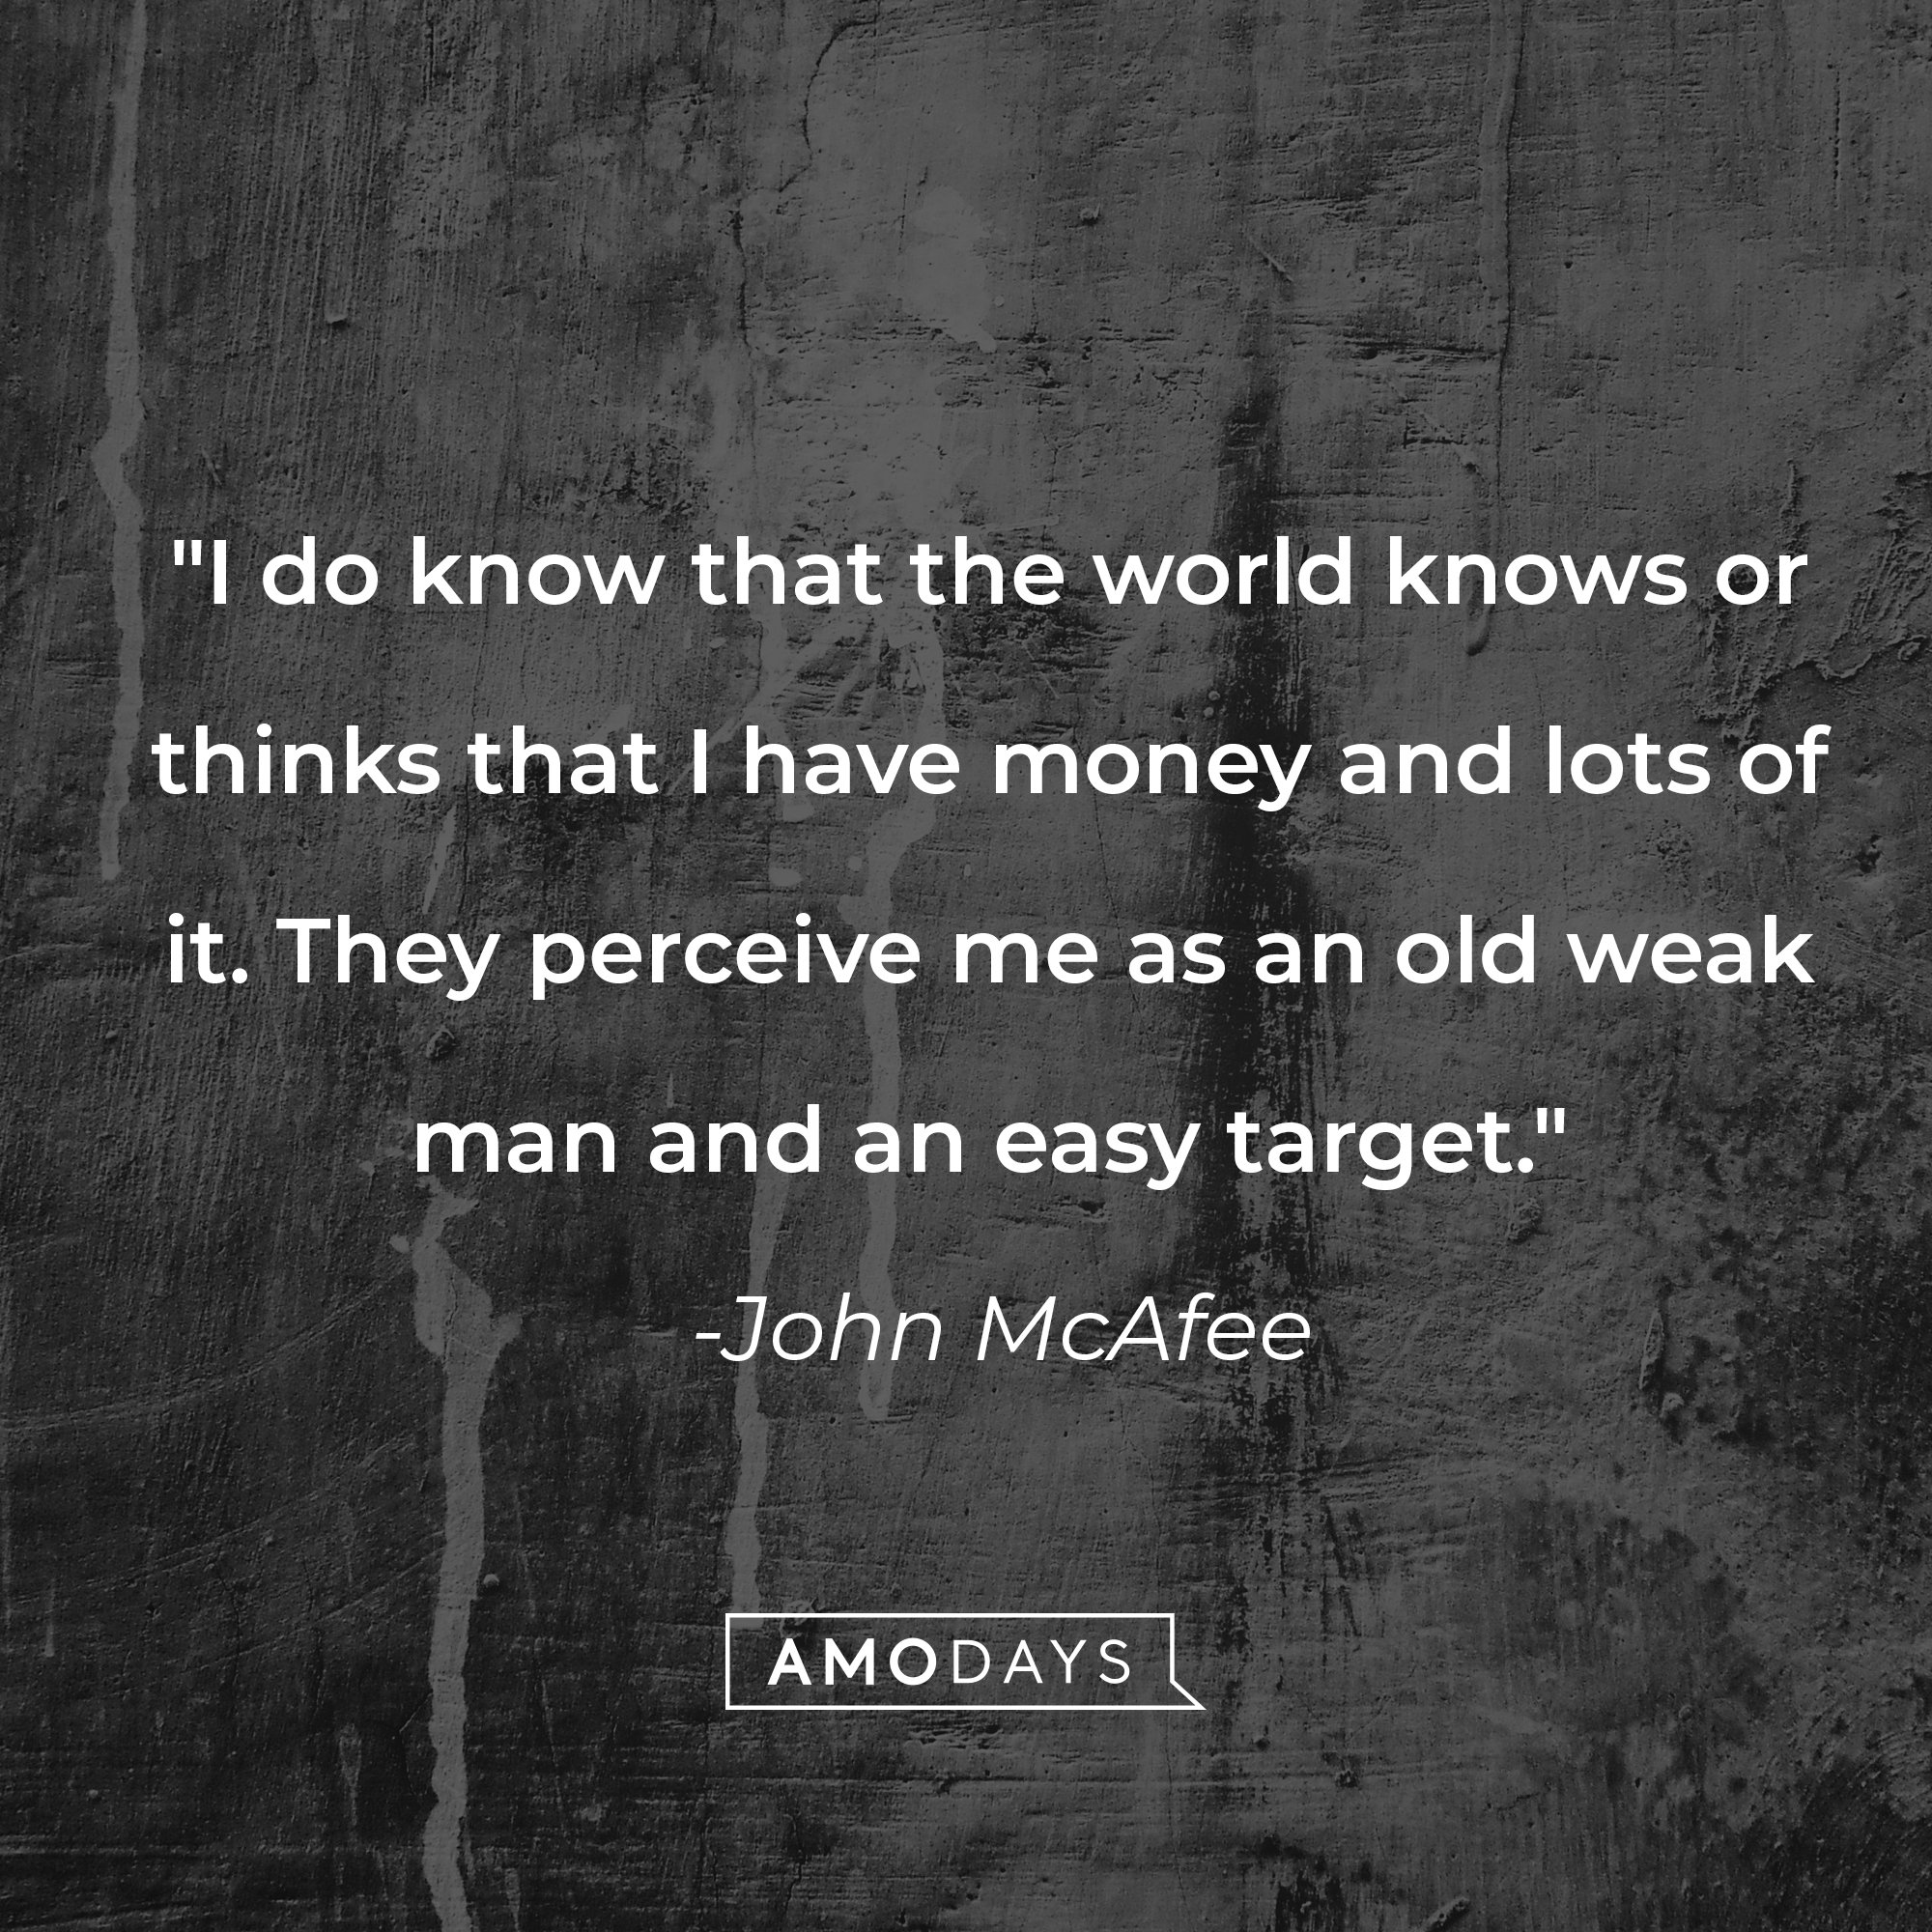 John McAfee's quote: "I do know that the world knows or thinks that I have money and lots of it. They perceive me as an old weak man and an easy target." | Image: AmoDays